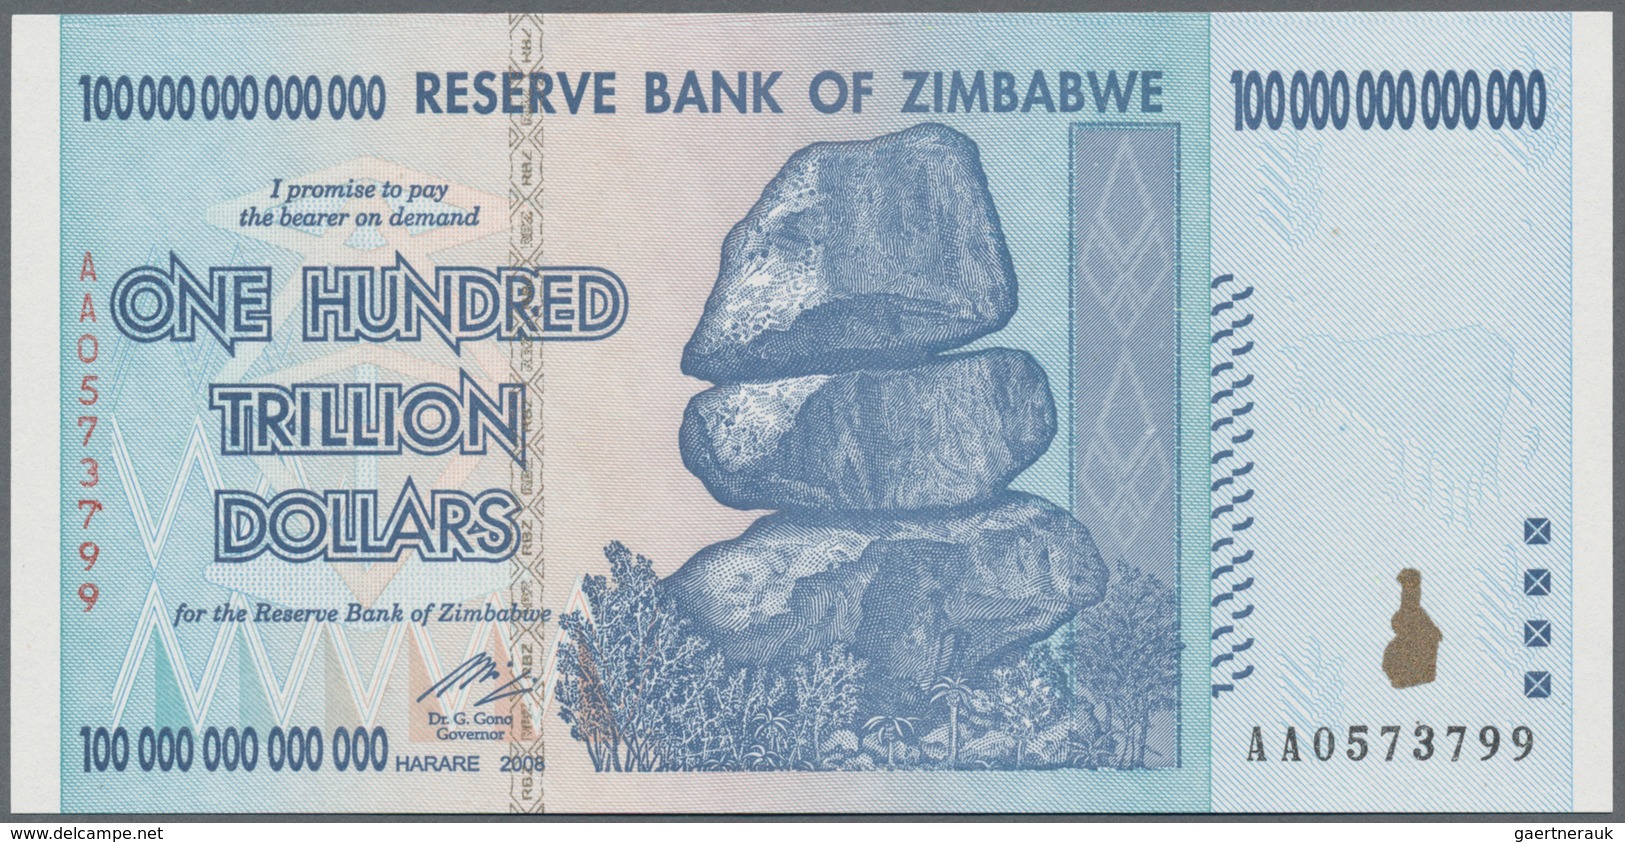 Zimbabwe: Set of 4 banknotes 10, 20, 50 and 100 Trillion Dollars 2008, P. 85-91 in UNC condition. Wo